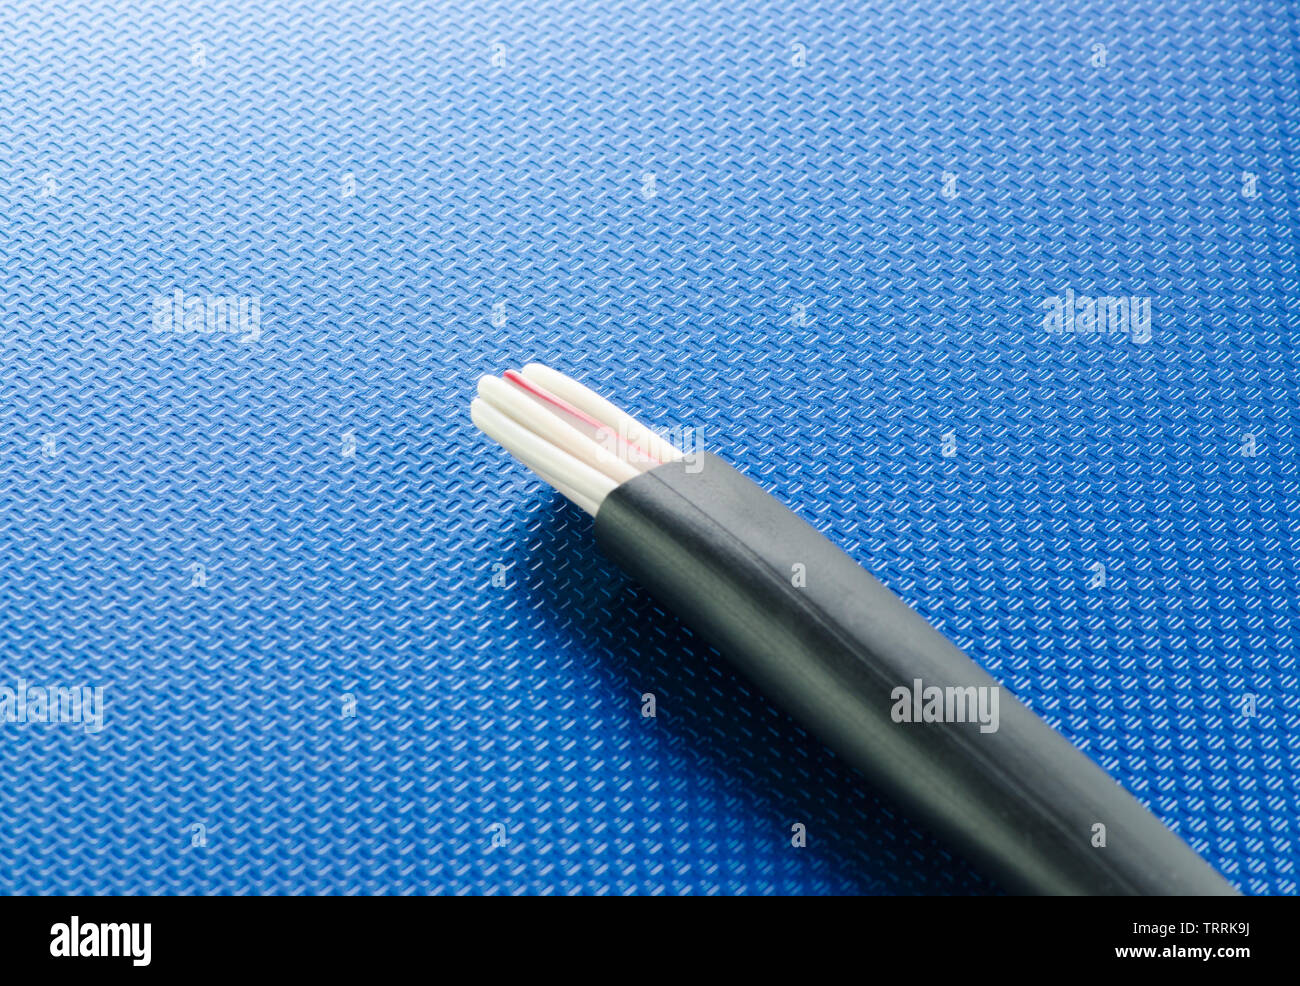 Cross-section of control cable on blue ribbed technological background Stock Photo